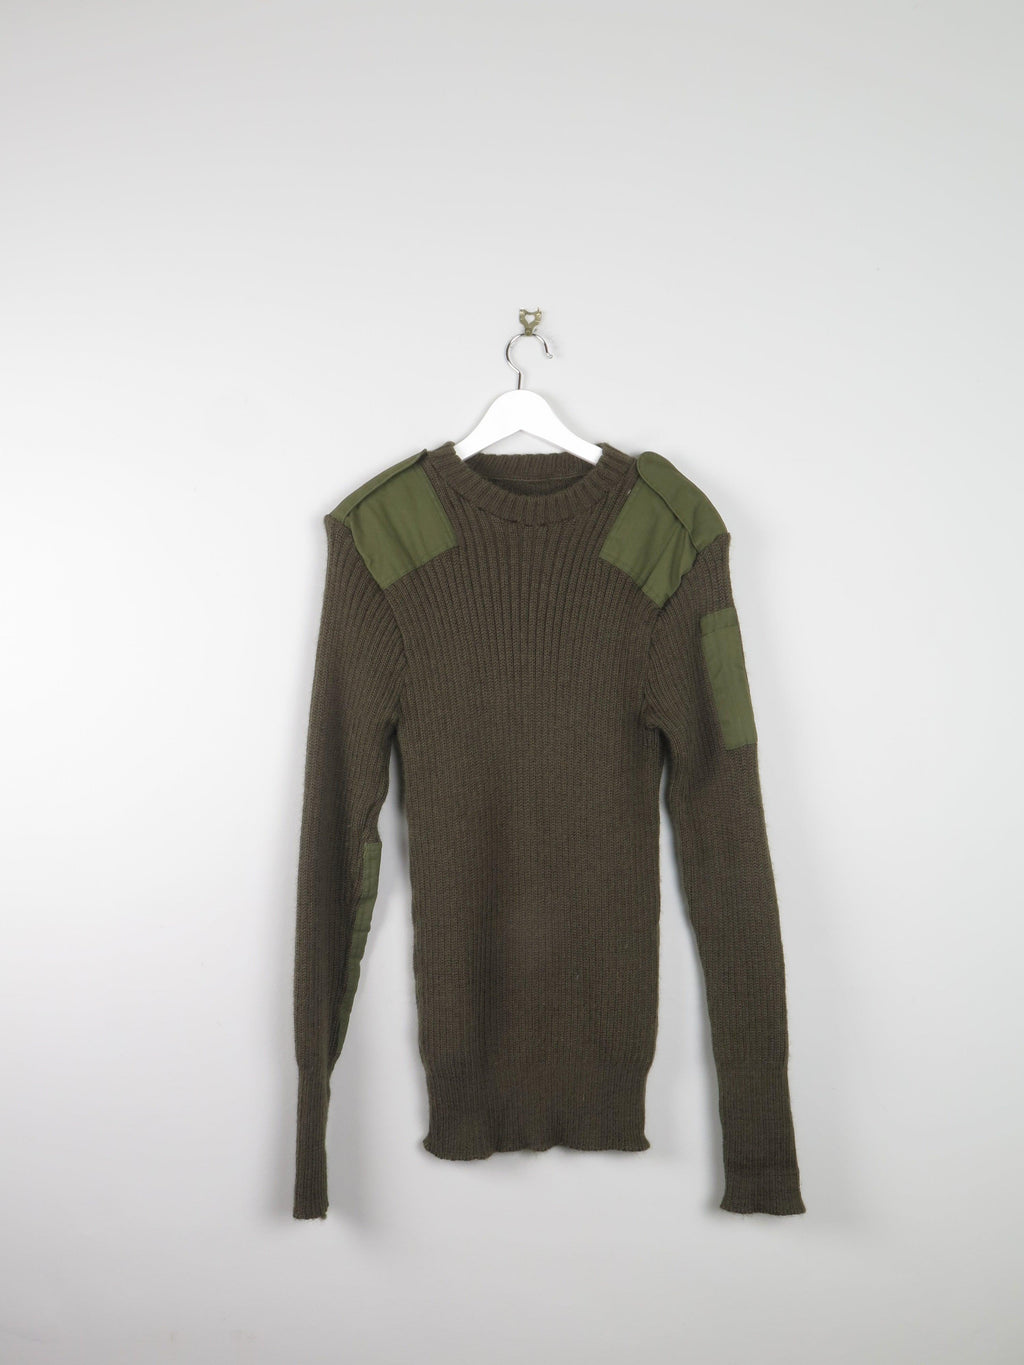 Mens Green Army Jumper M - The Harlequin